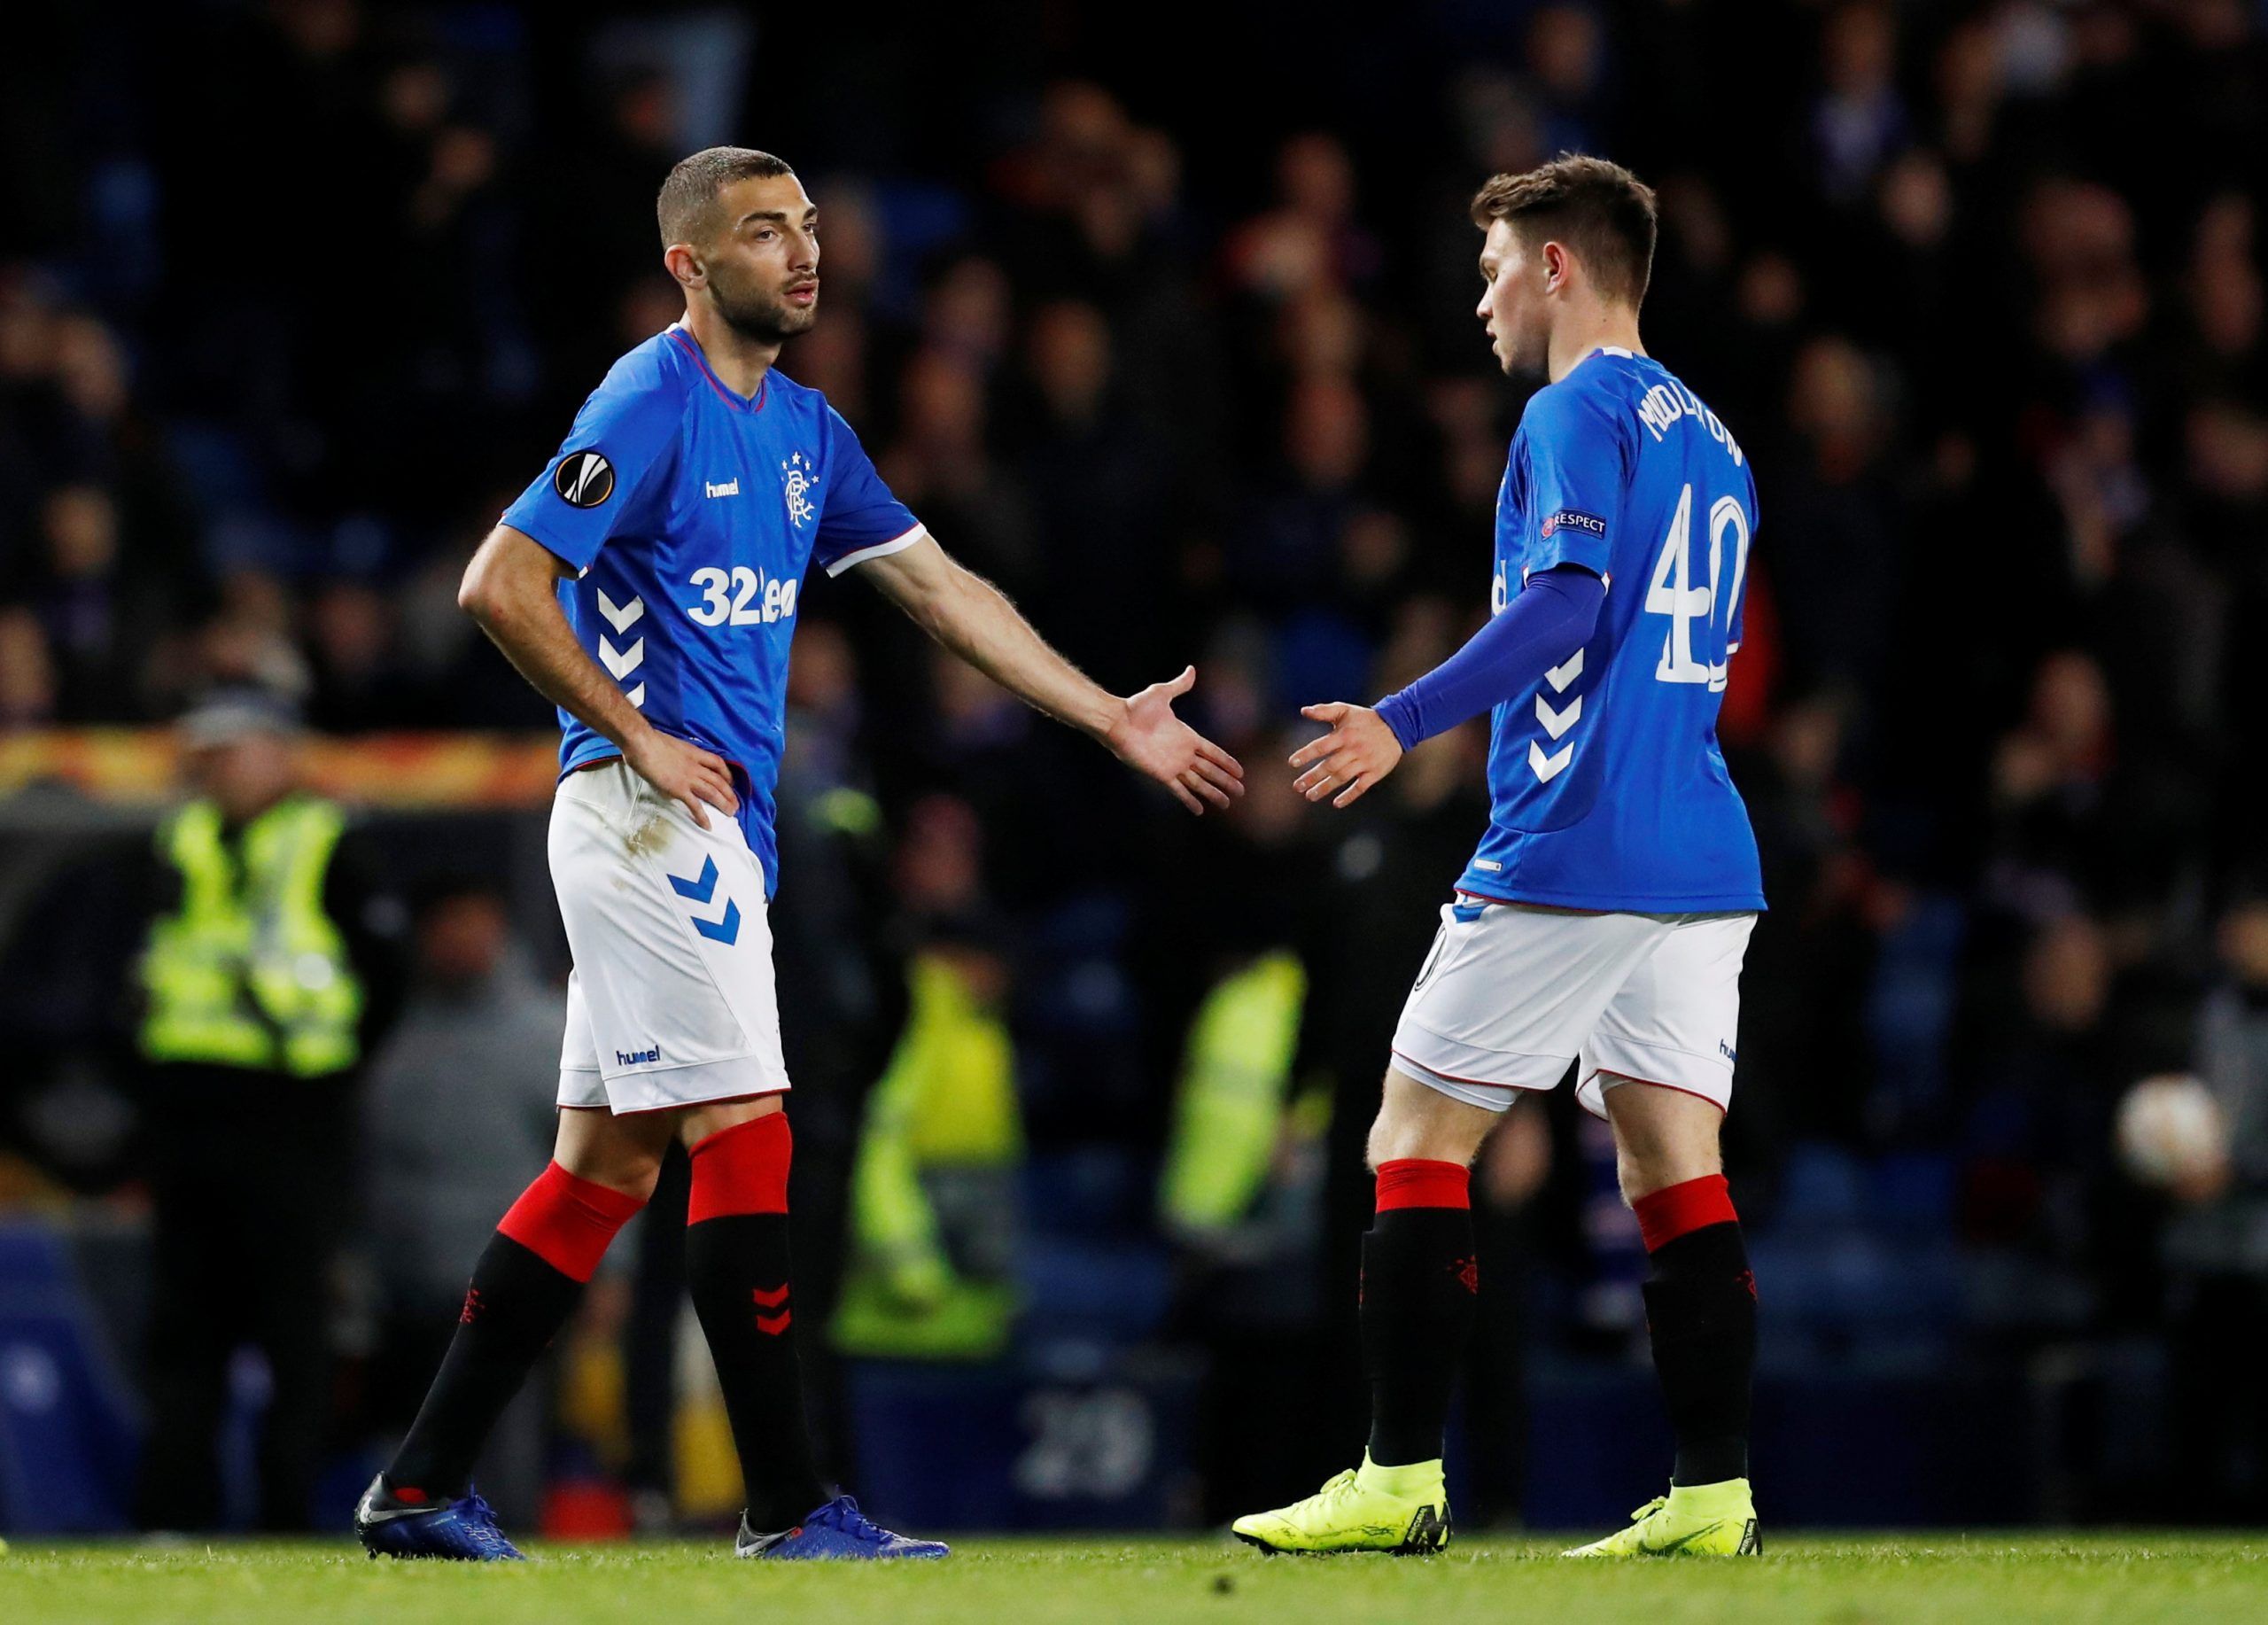 Soccer Football - Europa League - Group Stage - Group G - Rangers v Spartak Moscow - Ibrox, Glasgow, Britain - October 25, 2018  Rangers' Eros Grezda and Glenn Middleton after the match     REUTERS/Russell Cheyne